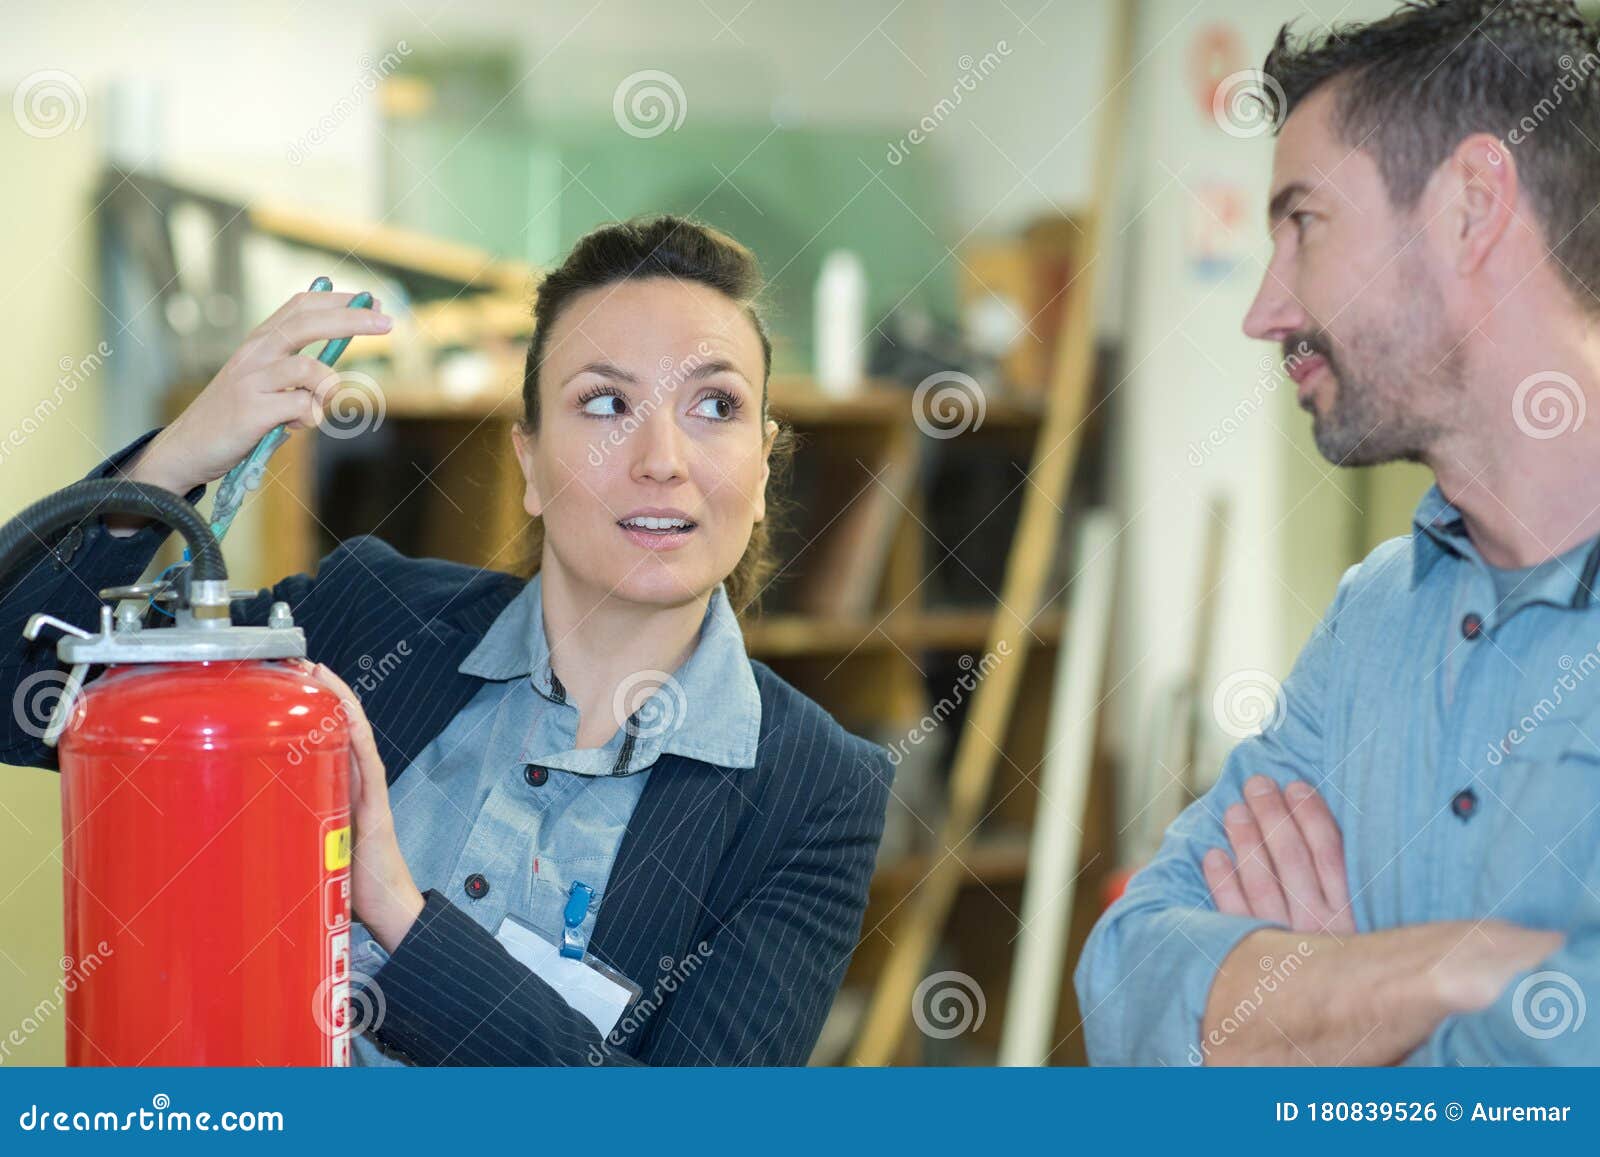 2 026 Fire Extinguisher Training Photos Free Royalty Free Stock Photos From Dreamstime